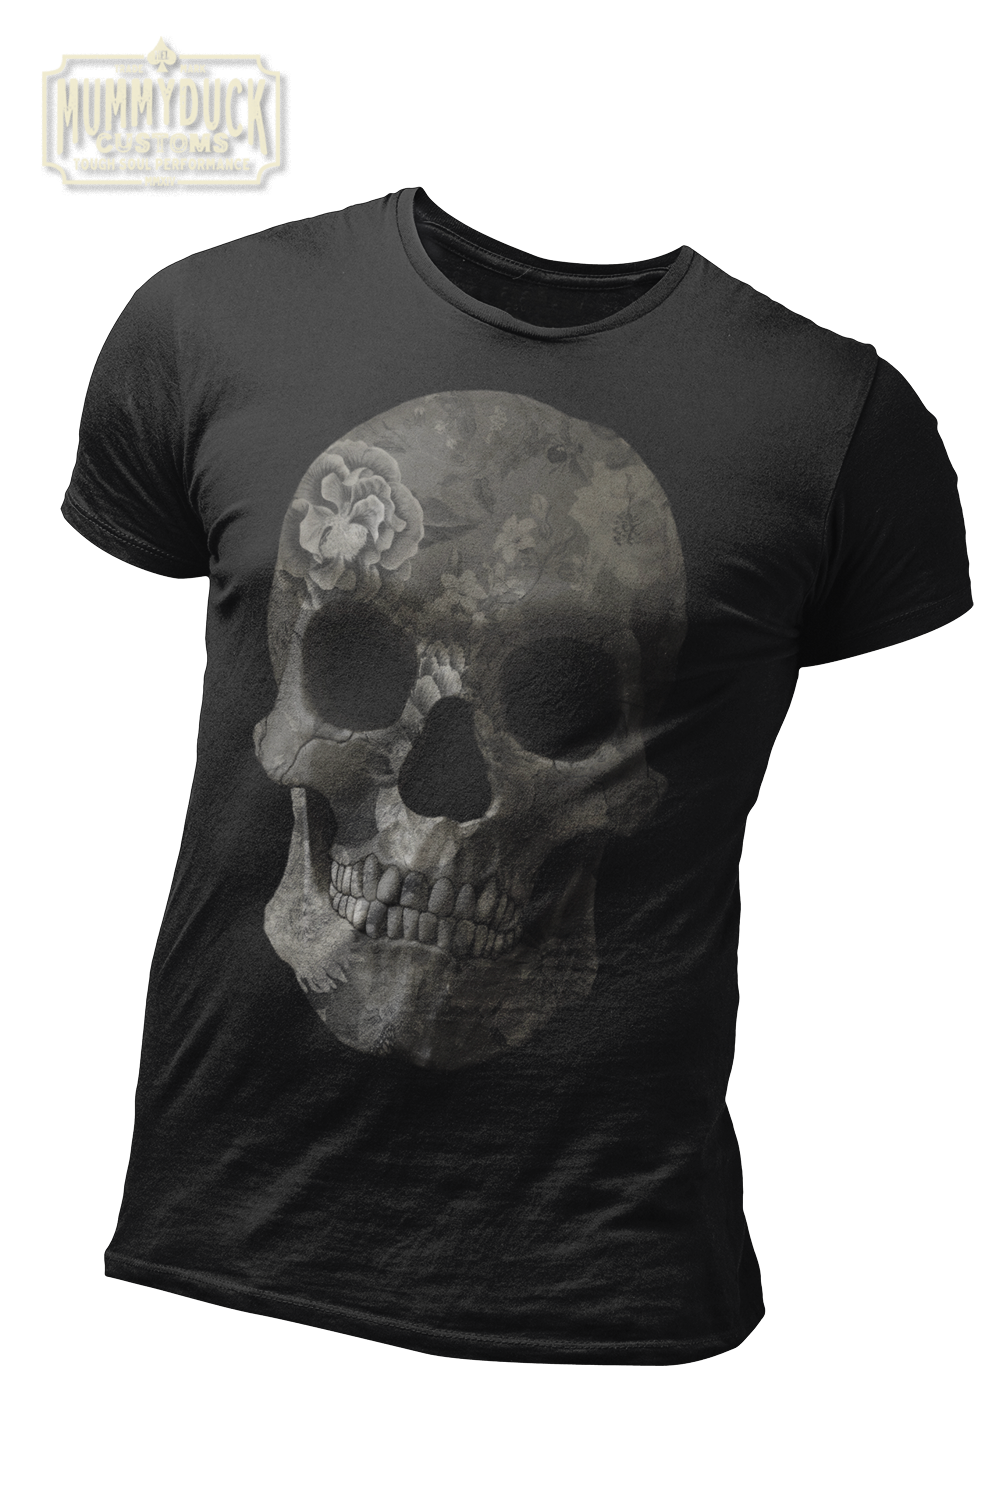 black t-shirt with flower texture grey skull